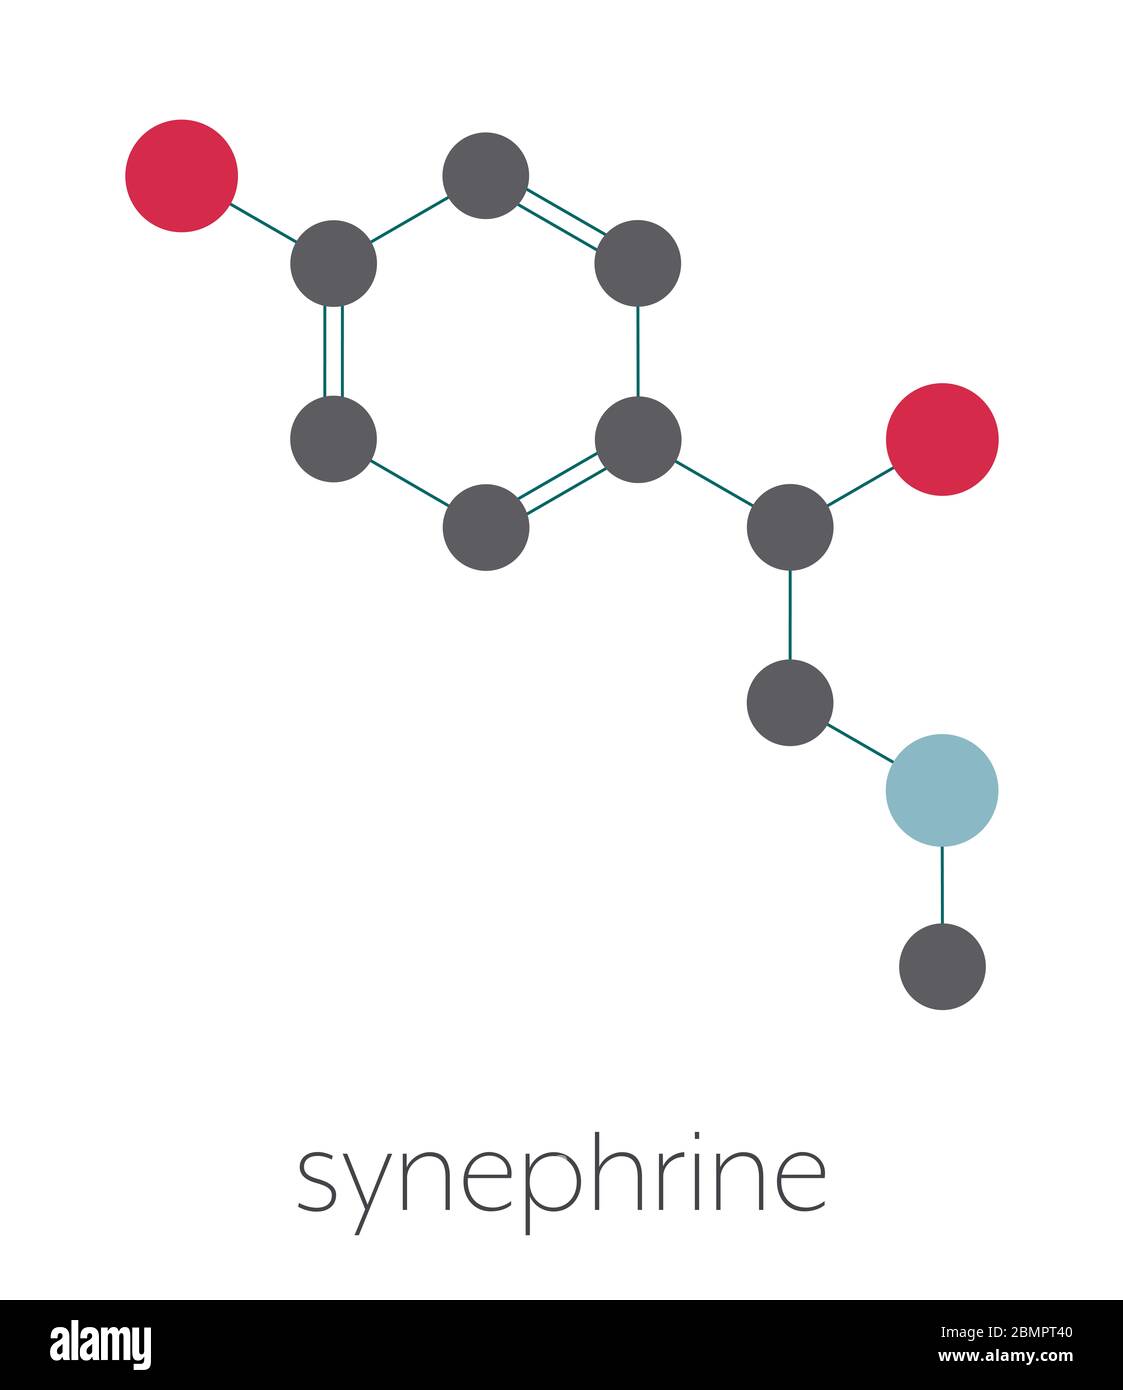 Synephrine herbal stimulant molecule. Present in several Citrus species. Stylized skeletal formula (chemical structure): Atoms are shown as color-coded circles: hydrogen (hidden), carbon (grey), oxygen (red), nitrogen (blue). Stock Photo